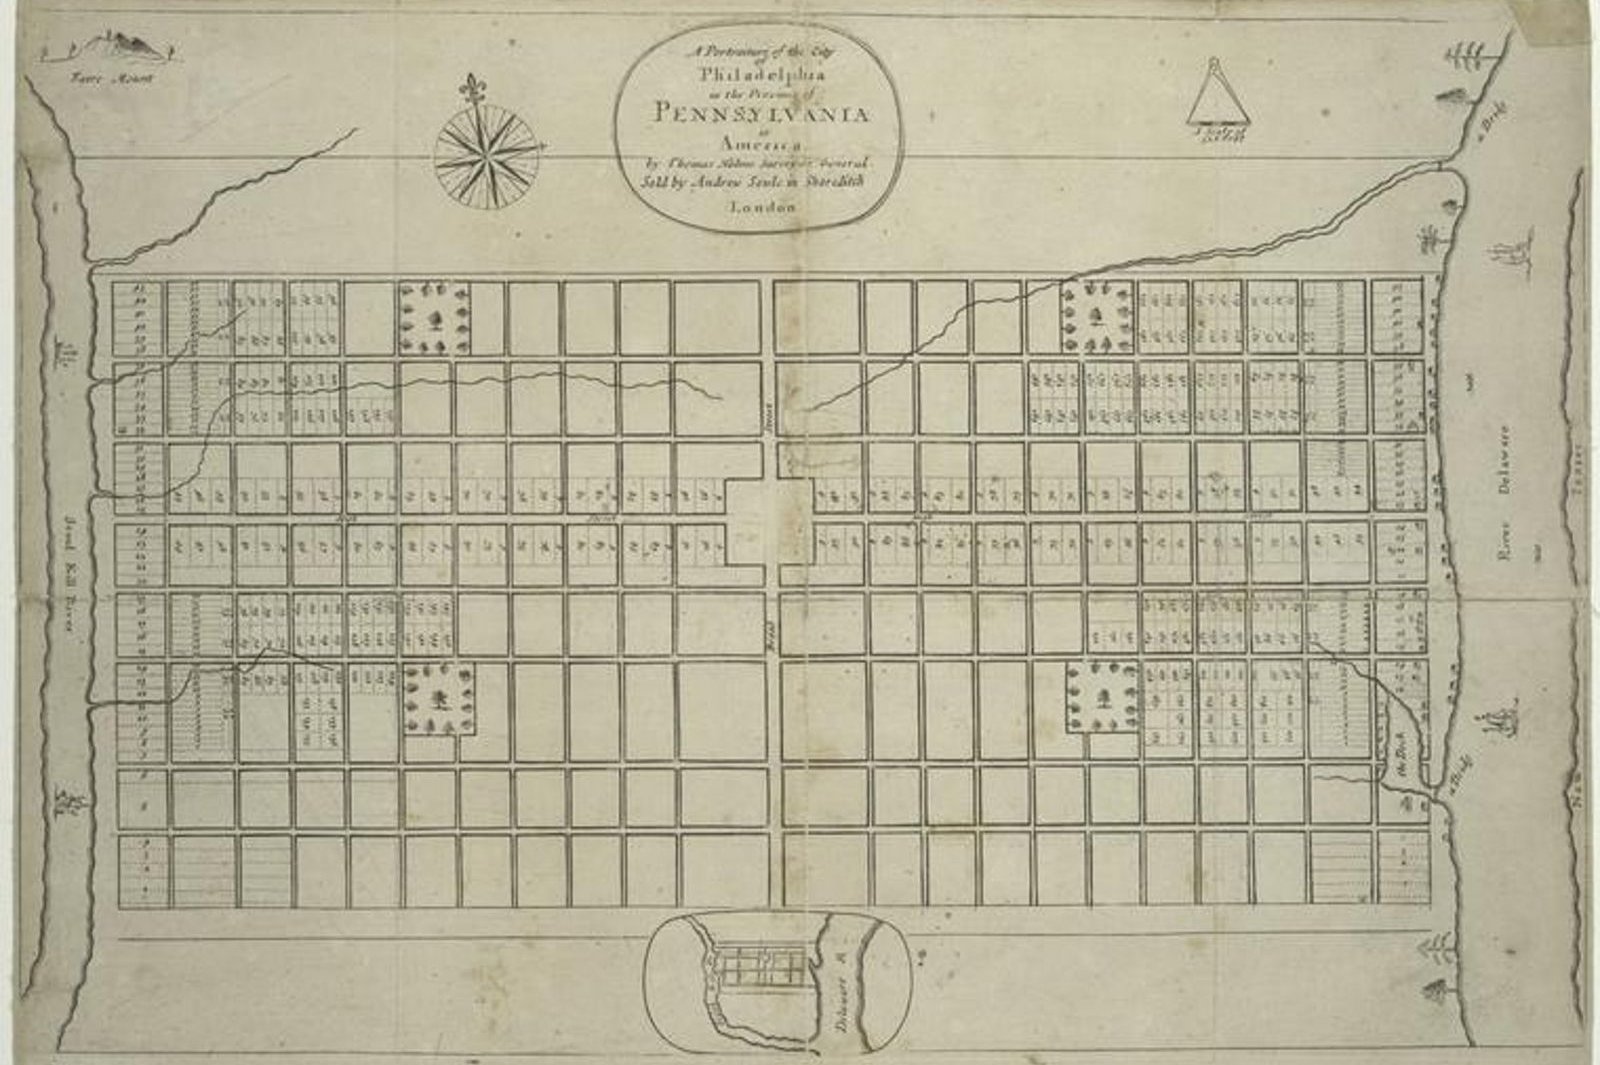 A portraiture of the city of Philadelphia in the province of Pennsylvania in America, showing the gridline plan for the city (1683)